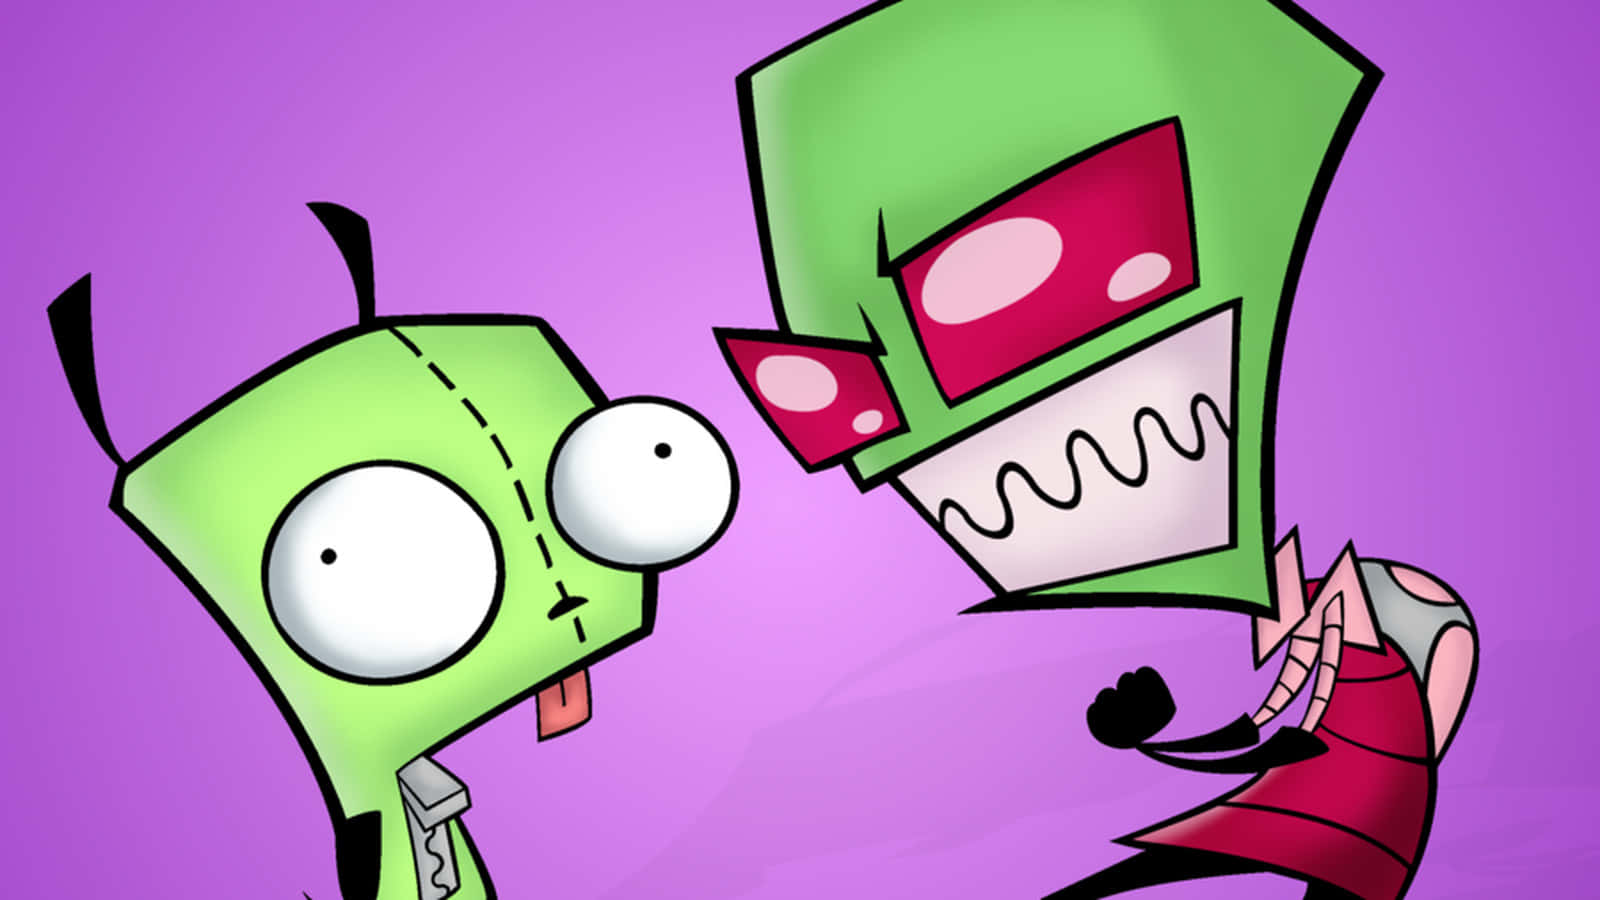 "Invader Zim is about to take over!"